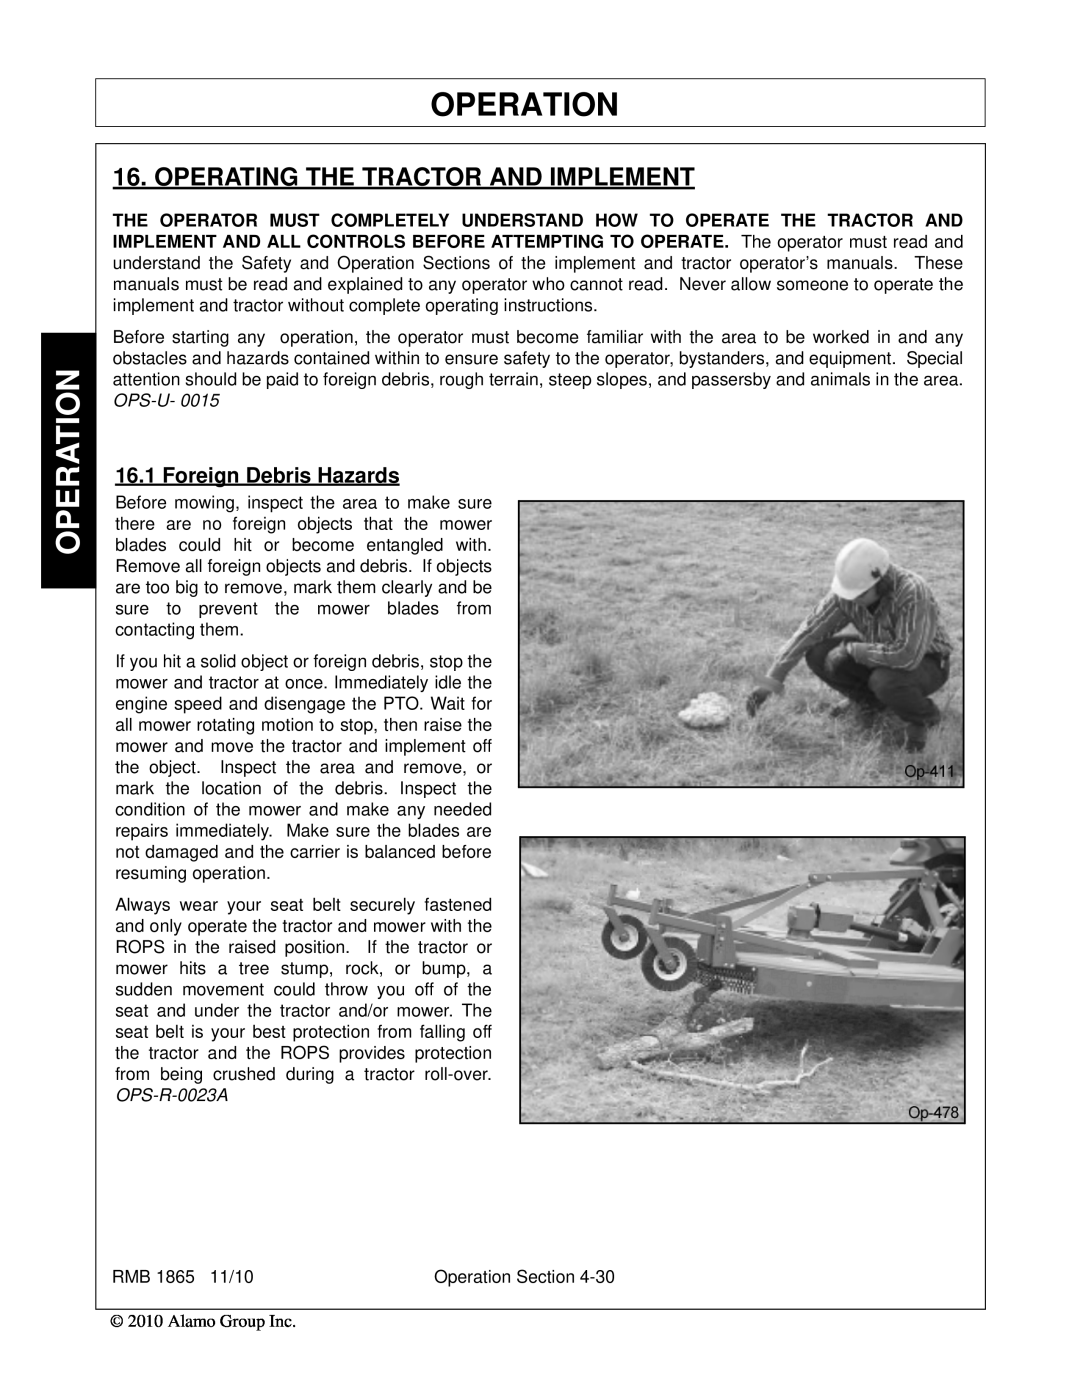 Bush Hog RMB 1865 manual Operation, Operating The Tractor And Implement, Foreign Debris Hazards 